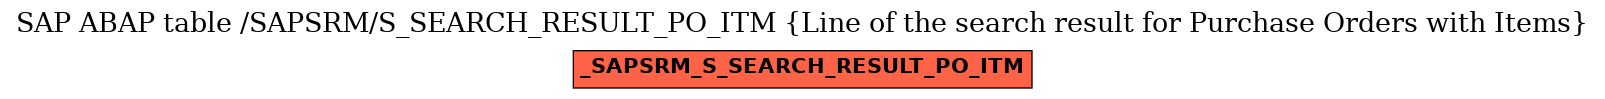 E-R Diagram for table /SAPSRM/S_SEARCH_RESULT_PO_ITM (Line of the search result for Purchase Orders with Items)